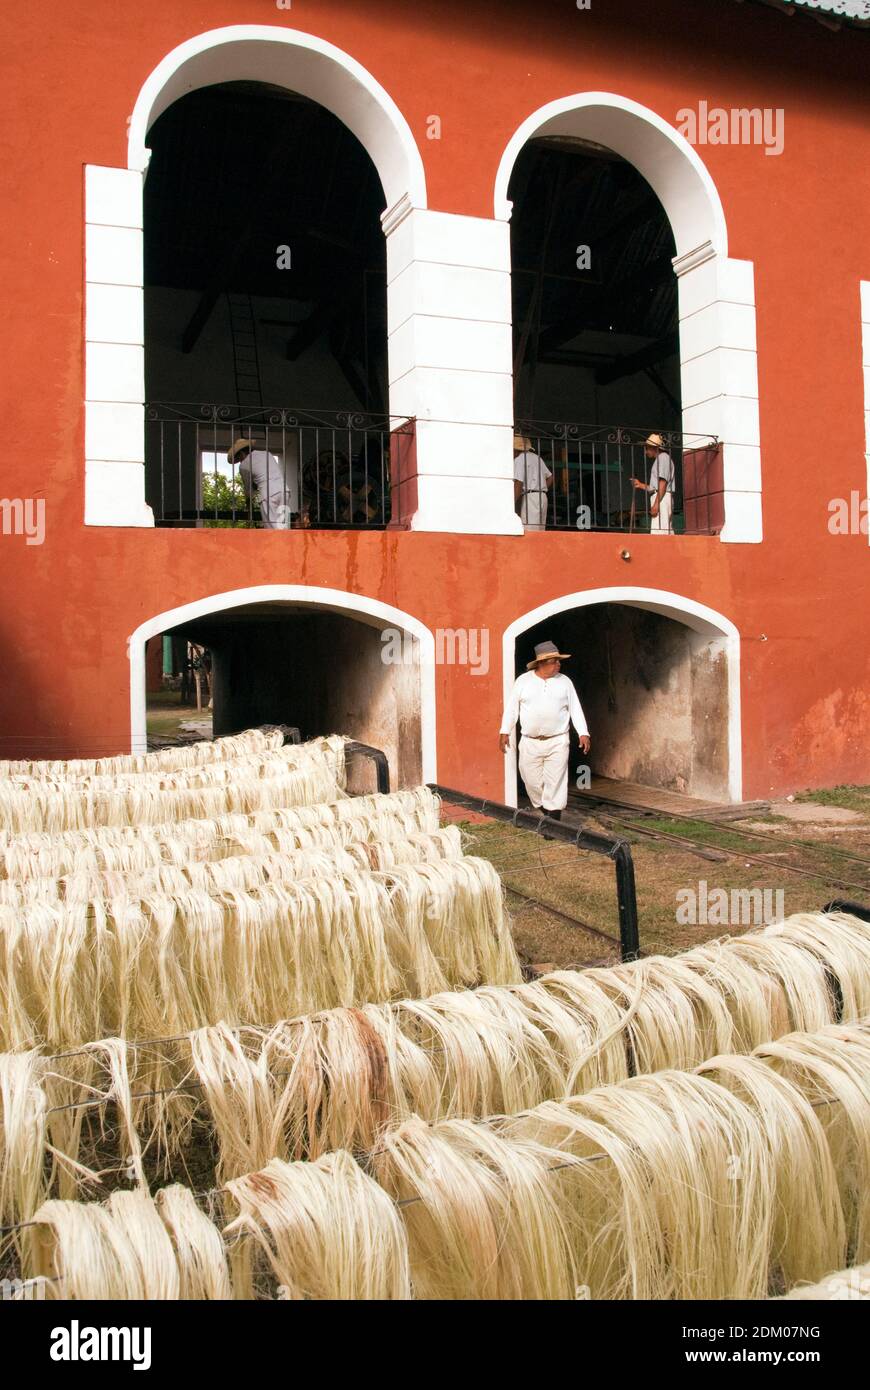 Workers process Henequen, an agave plant, into a fiber suitable for rope and twine, at the Hacienda Sotuta de Peon, Yucatan, Mexico. Stock Photo